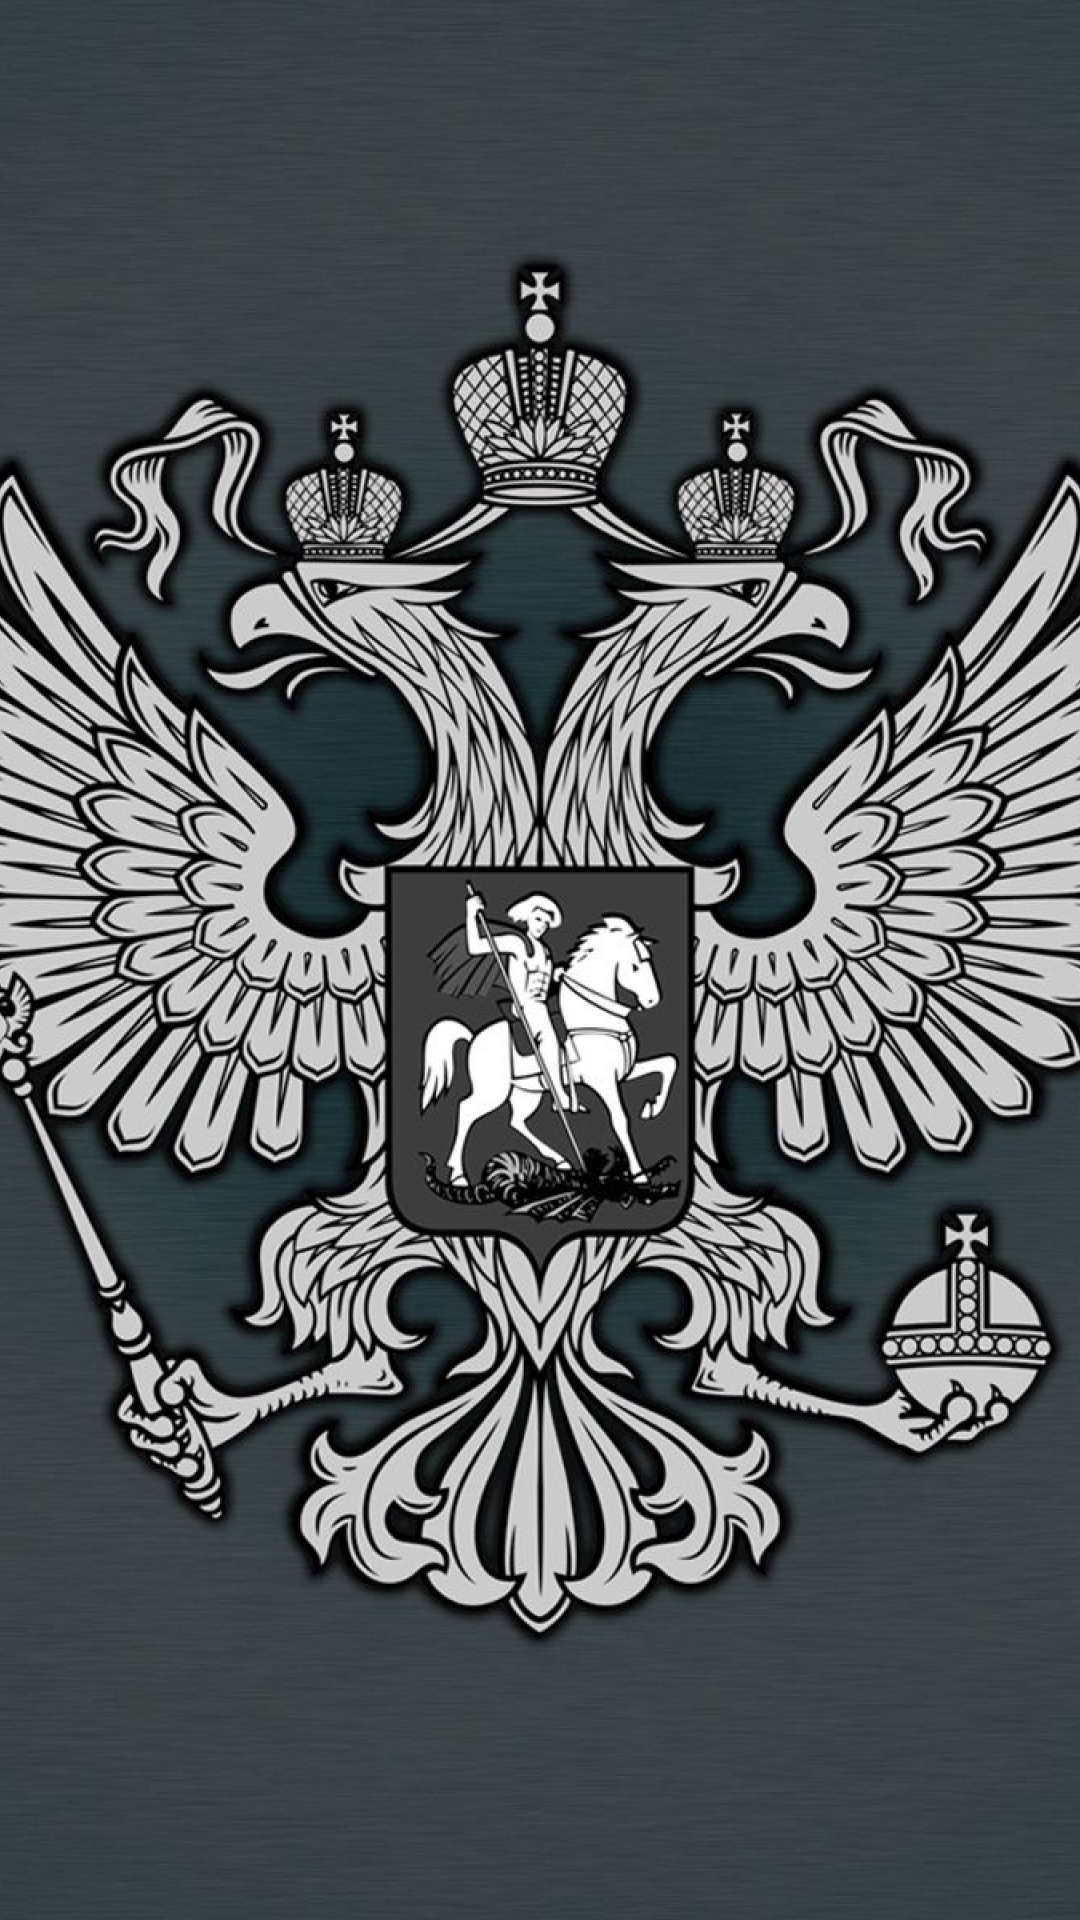 Coat of arms of Russia wallpaper 1080x1920